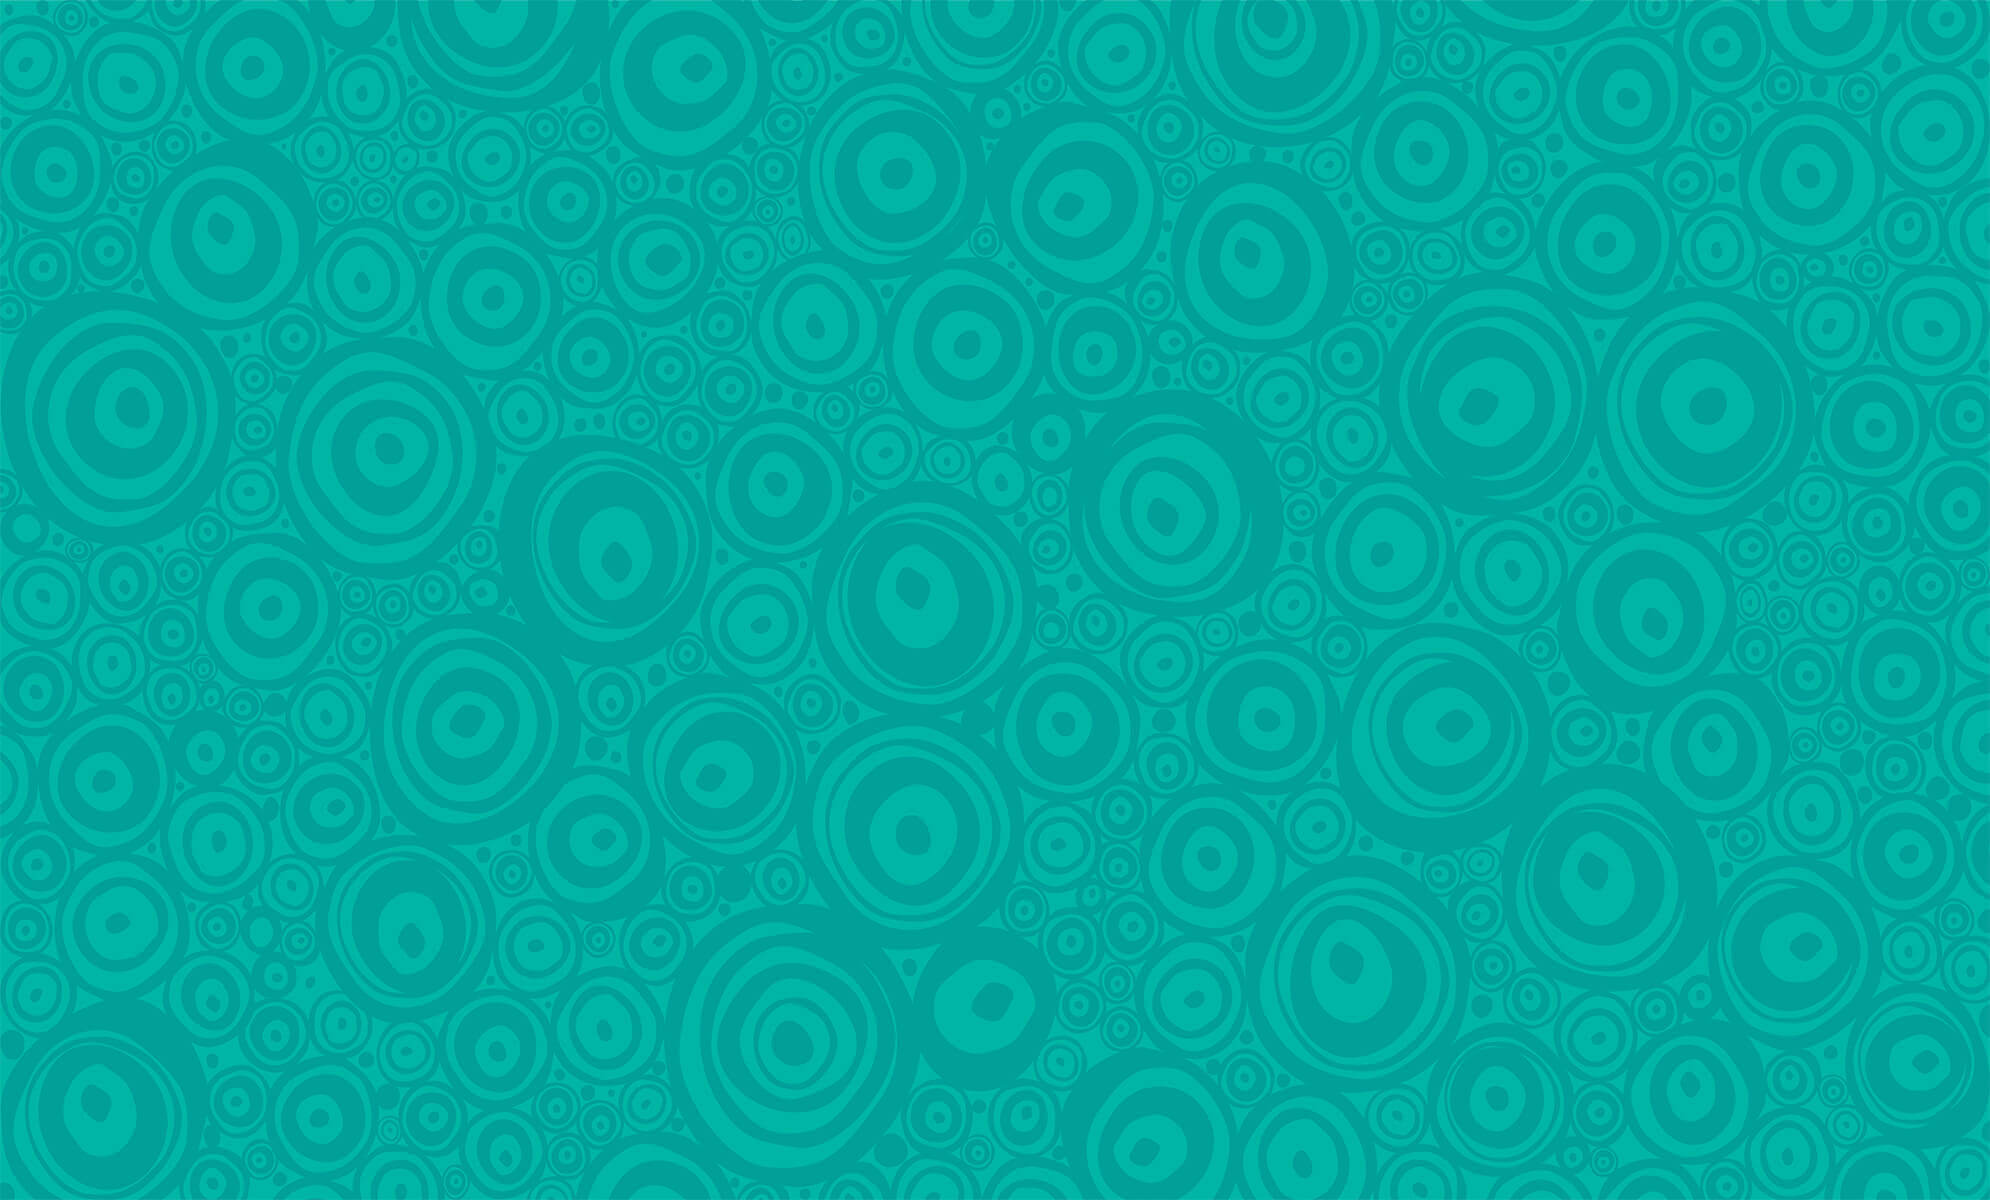 Background circles - teal